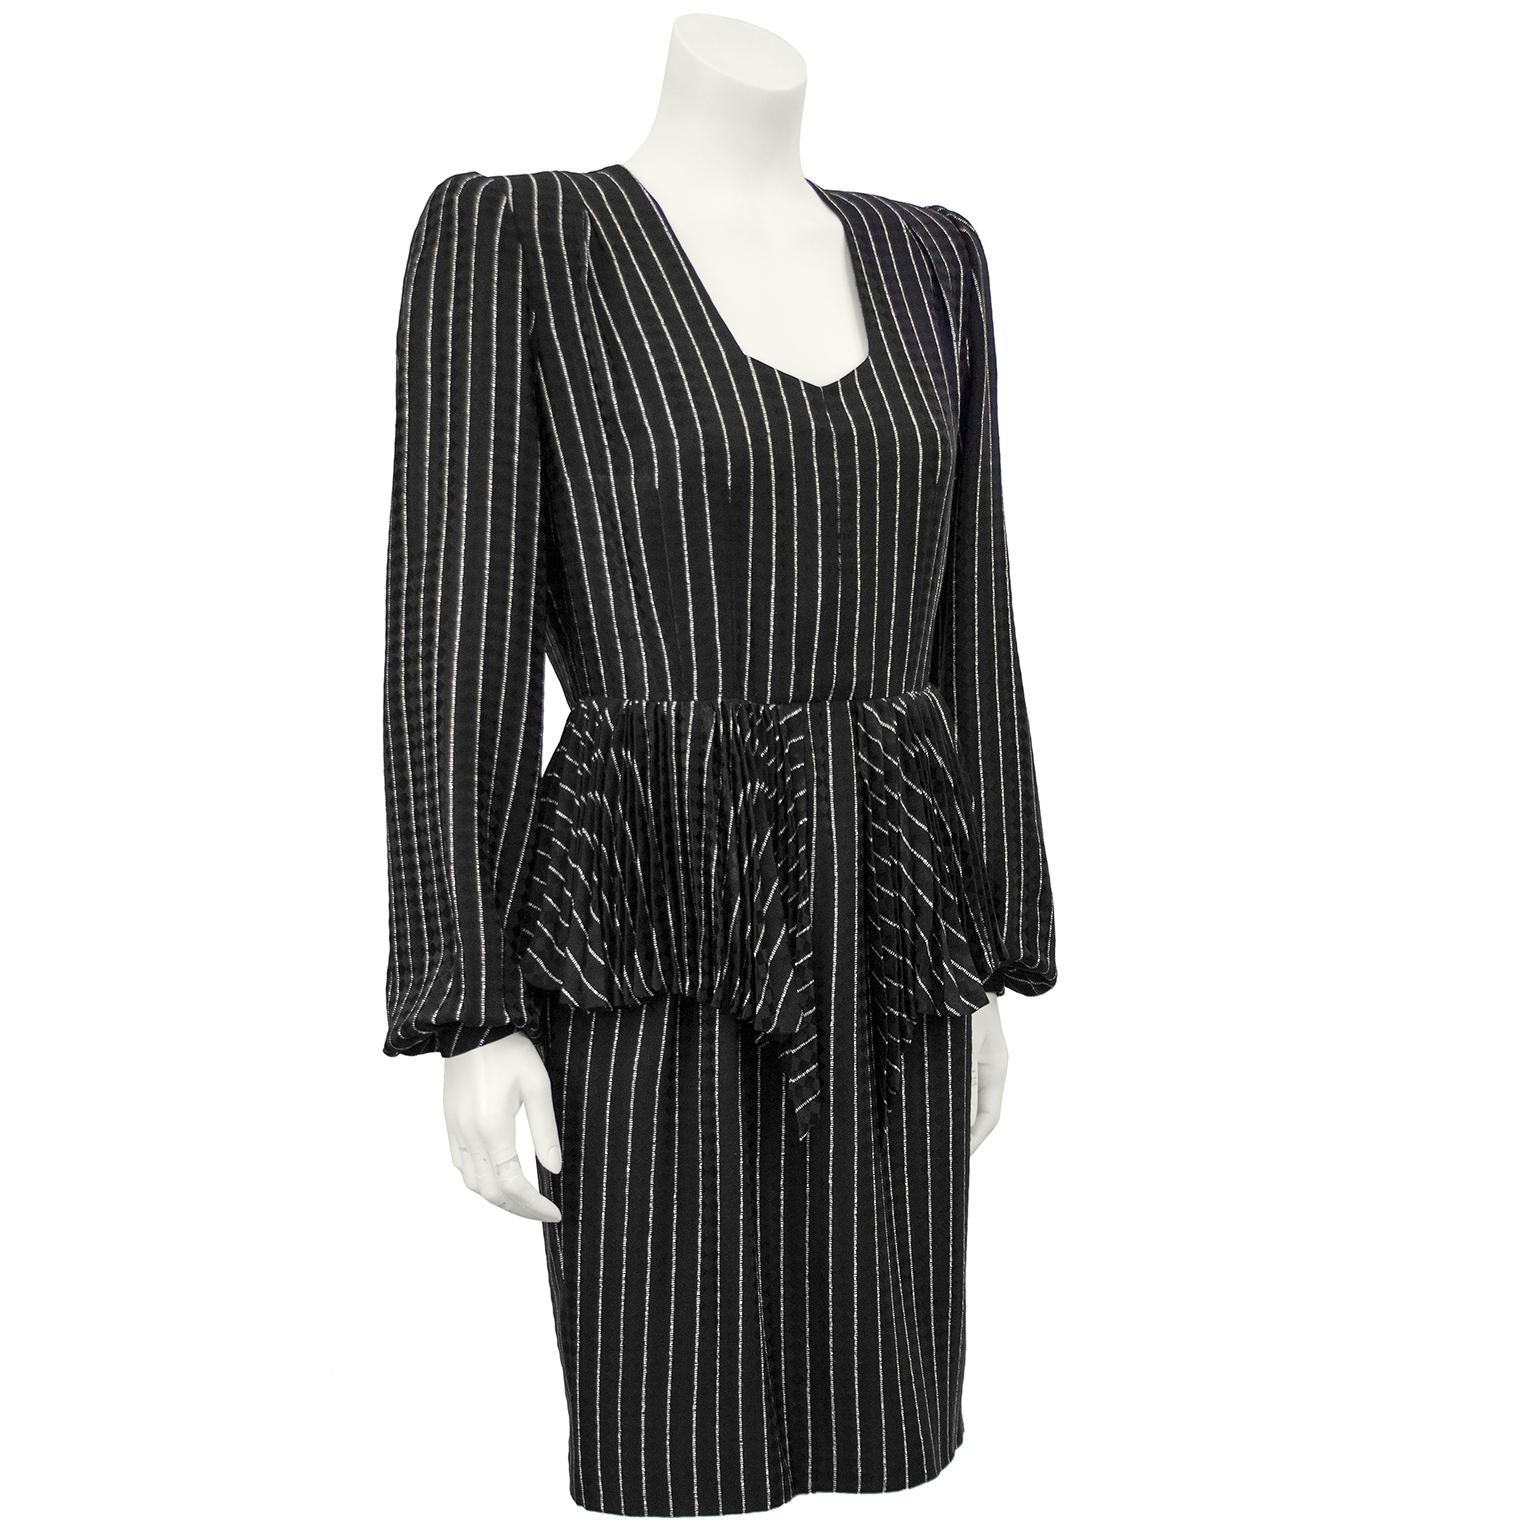 1980s Andre Laug black and white pinstriped silk day dress with pleated peplum detail. The squared off V neckline is accented with shoulder pads and a pleated peplum detail at the waist. The dress falls to the just above the knee and has black